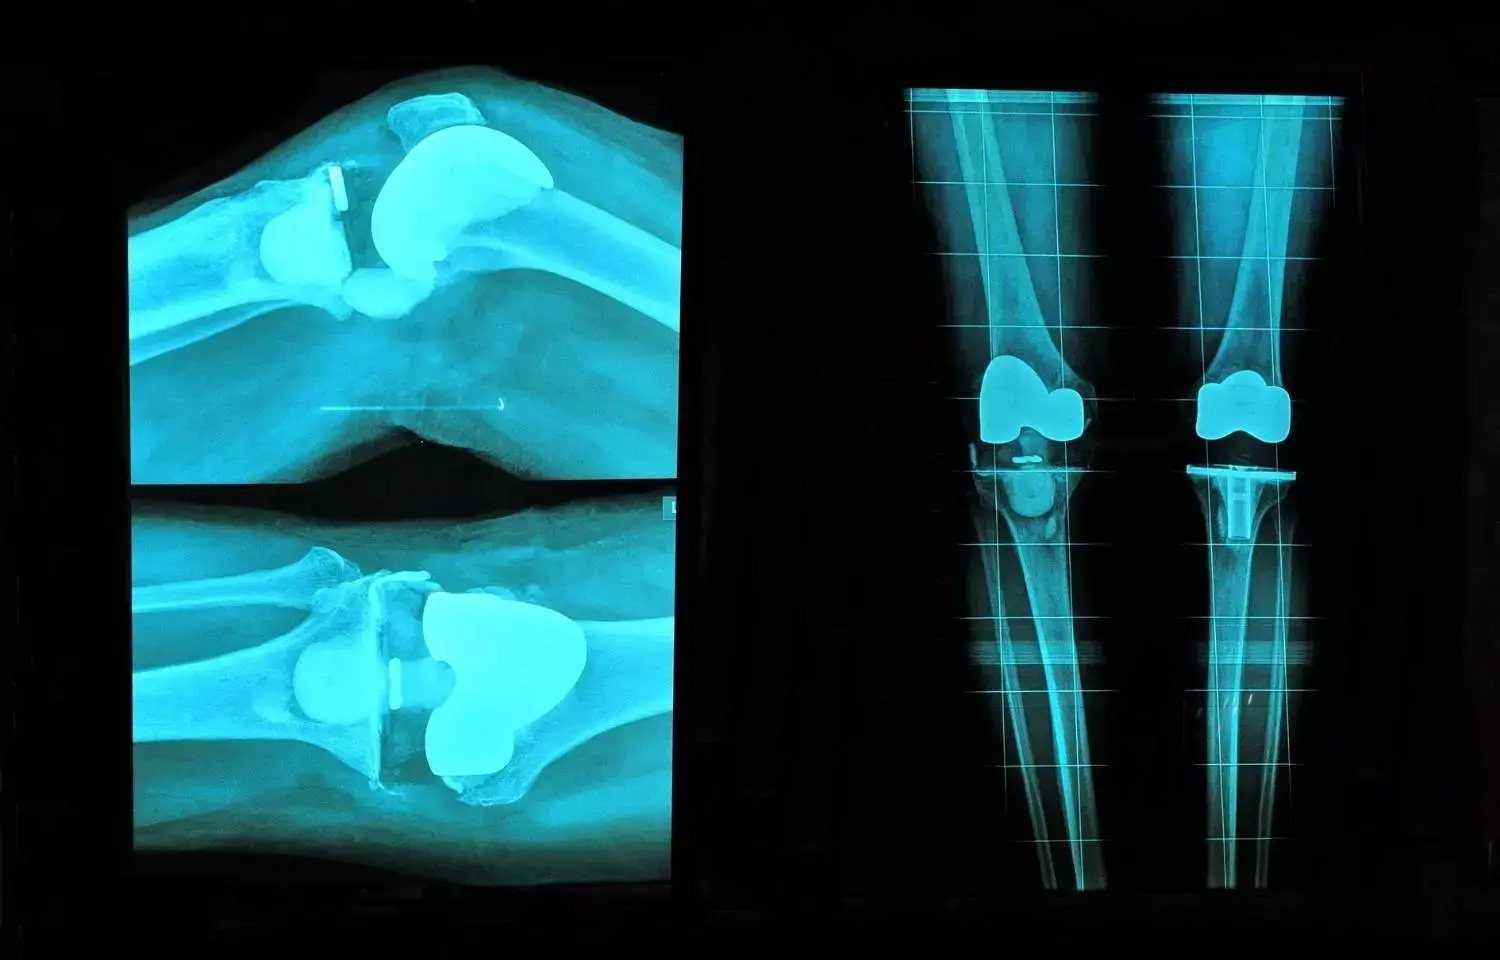 Cementless total knee arthroplasty tied to excellent biologic fixation reveals multispectral MRI